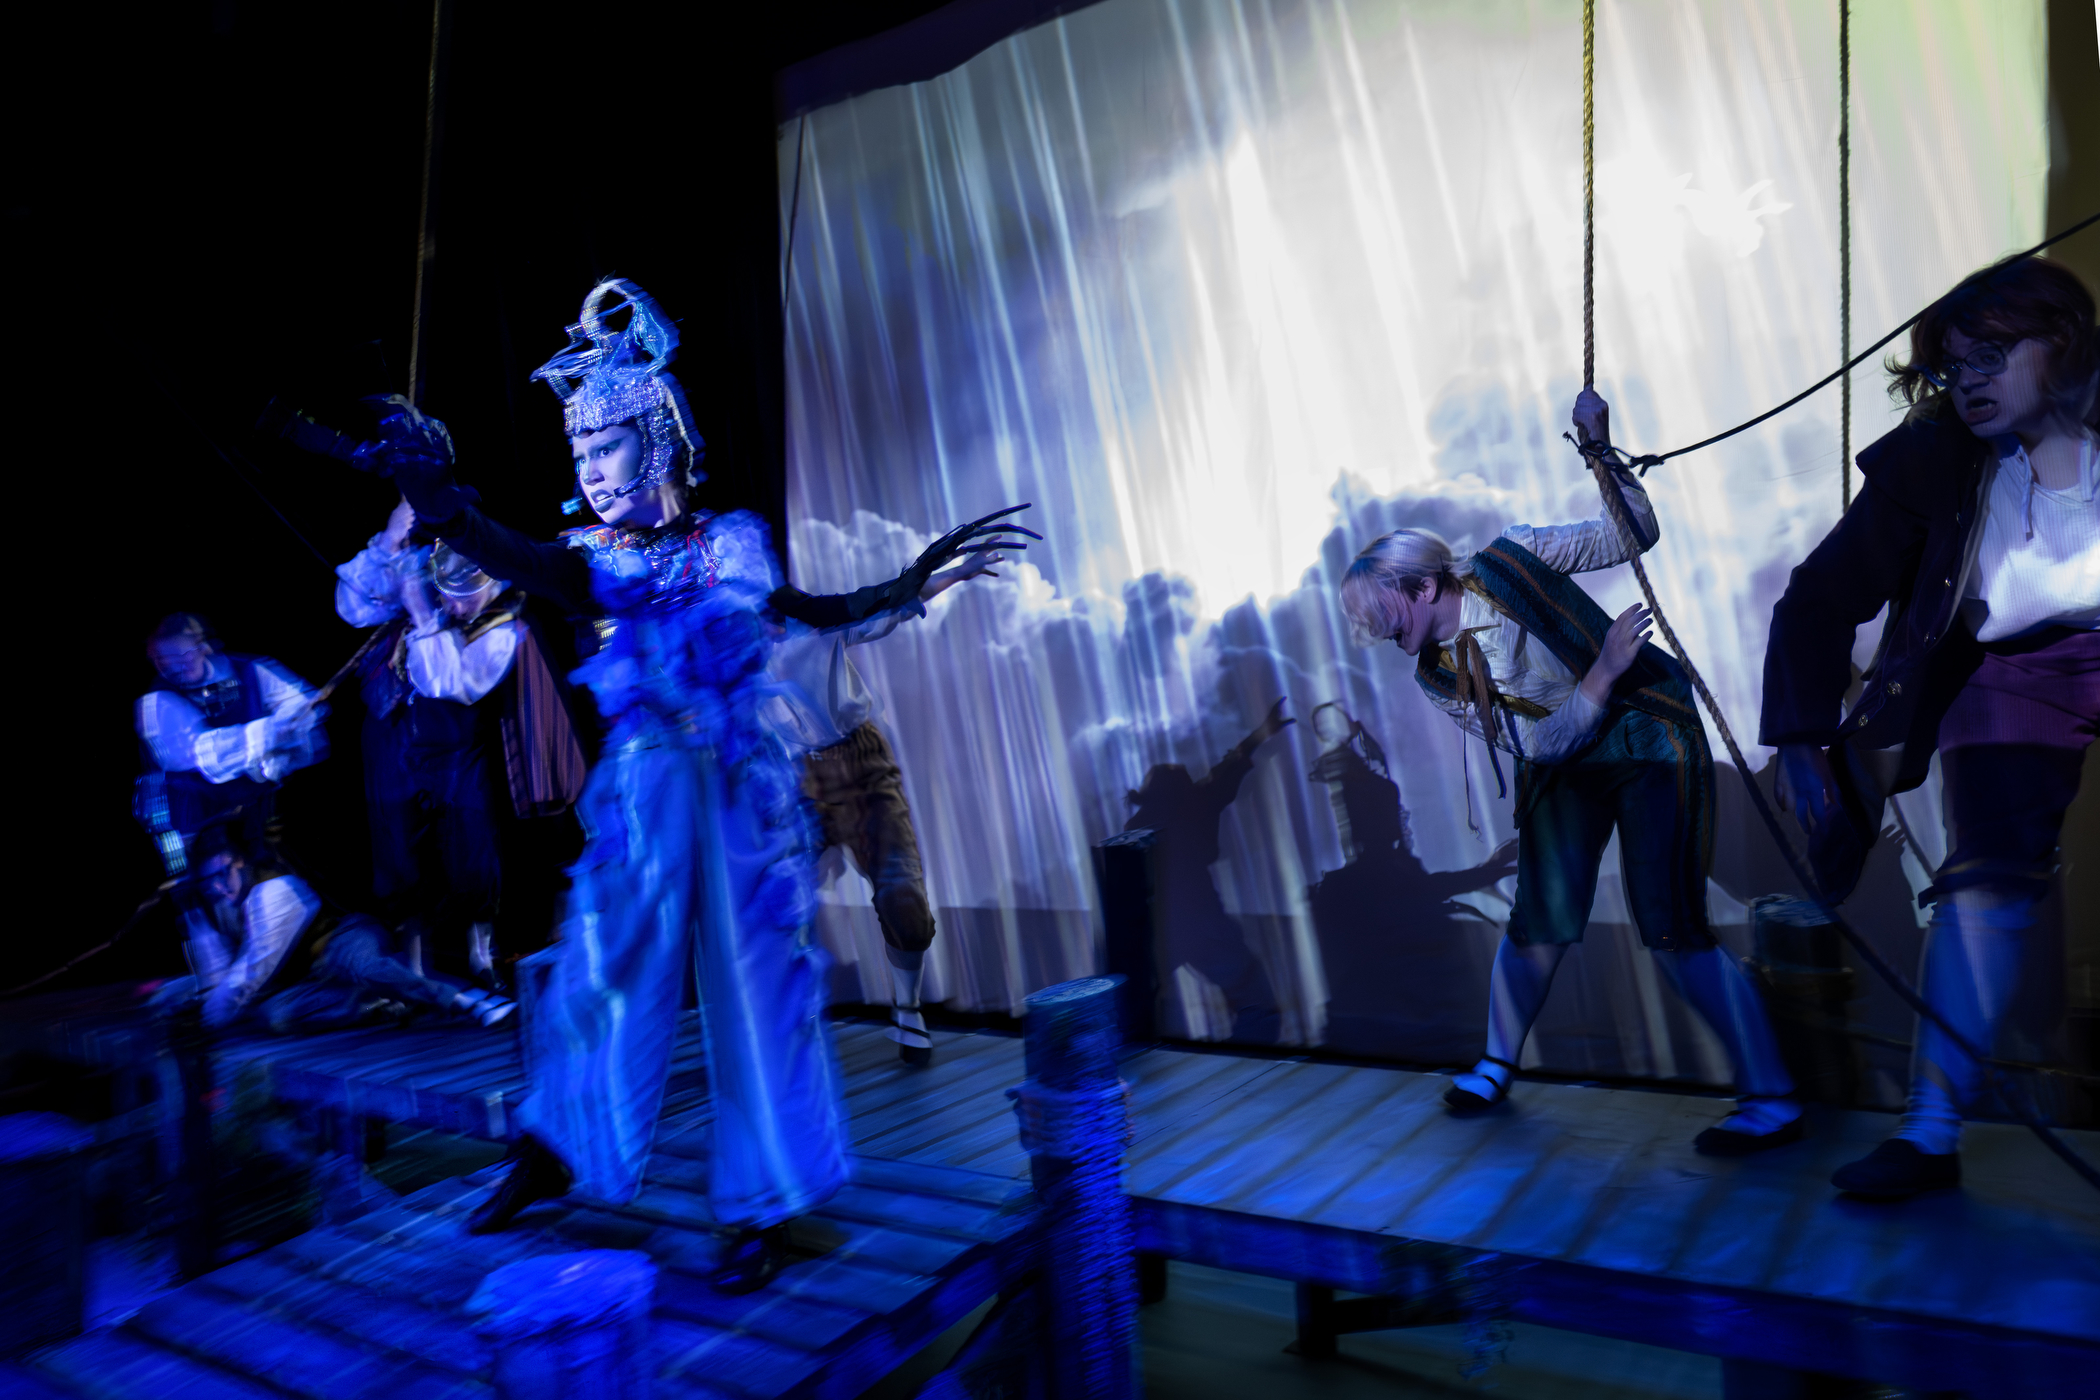 Transylvania ‘Tempest’ staging offers opportunities for theater design and technology majors